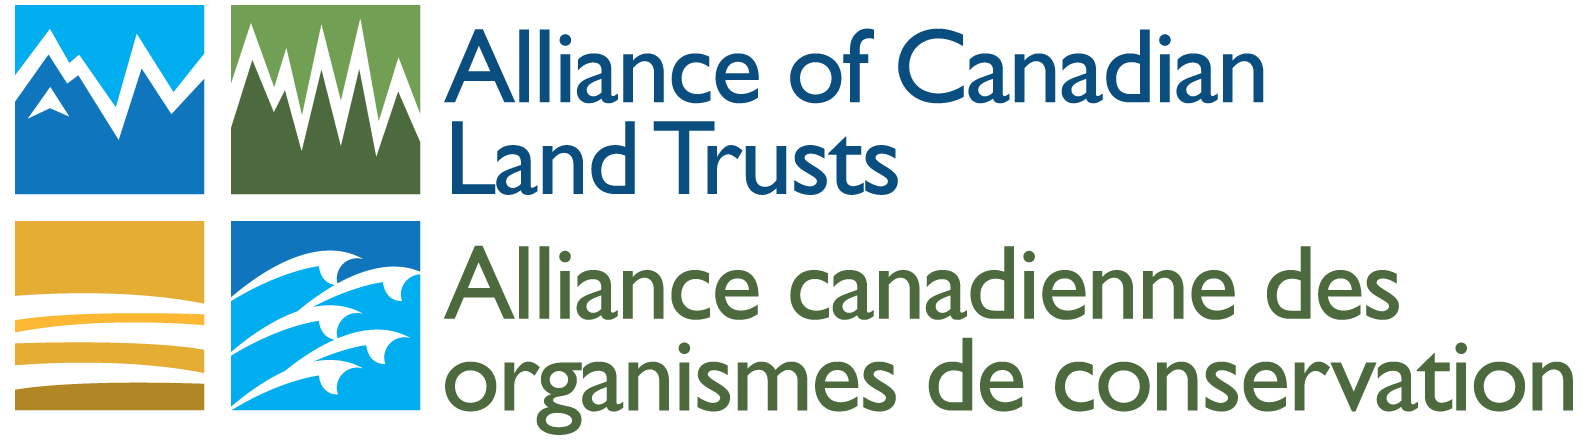 Alliance of Canadian Land Trusts